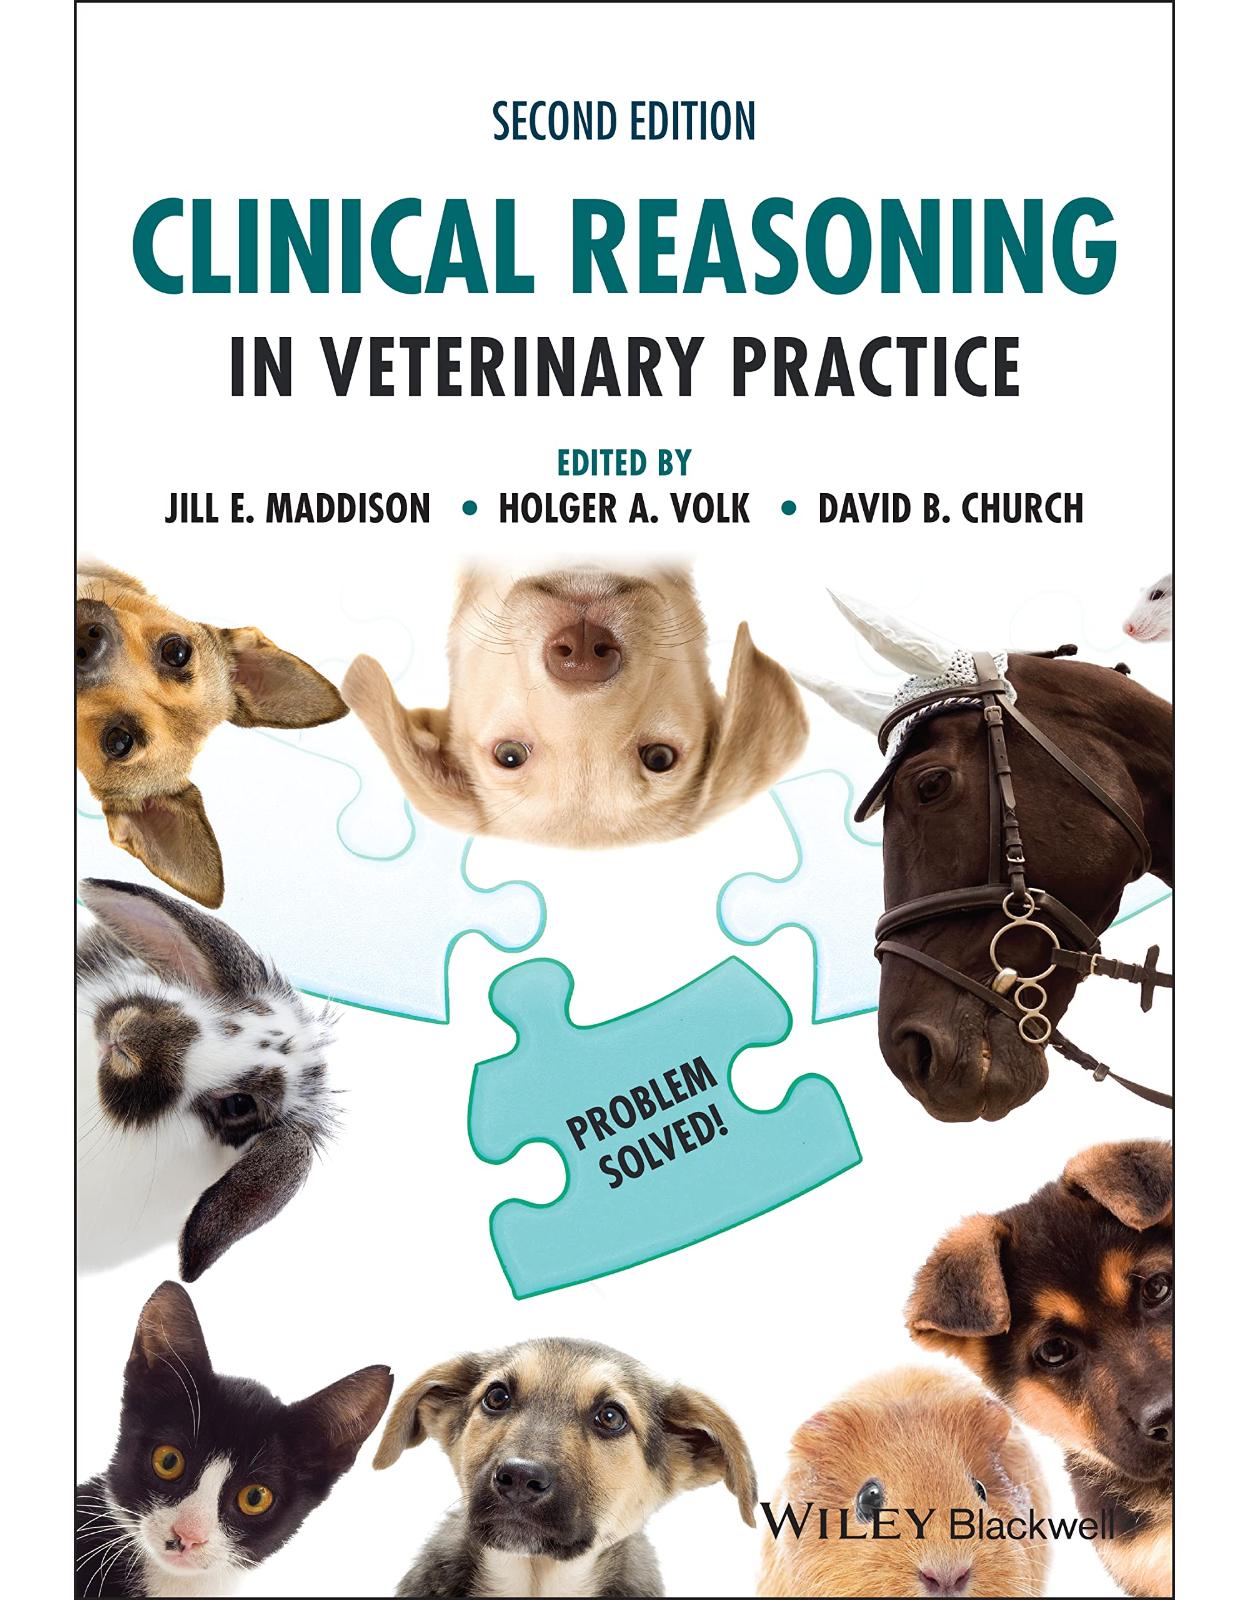 Clinical Reasoning in Veterinary Practice